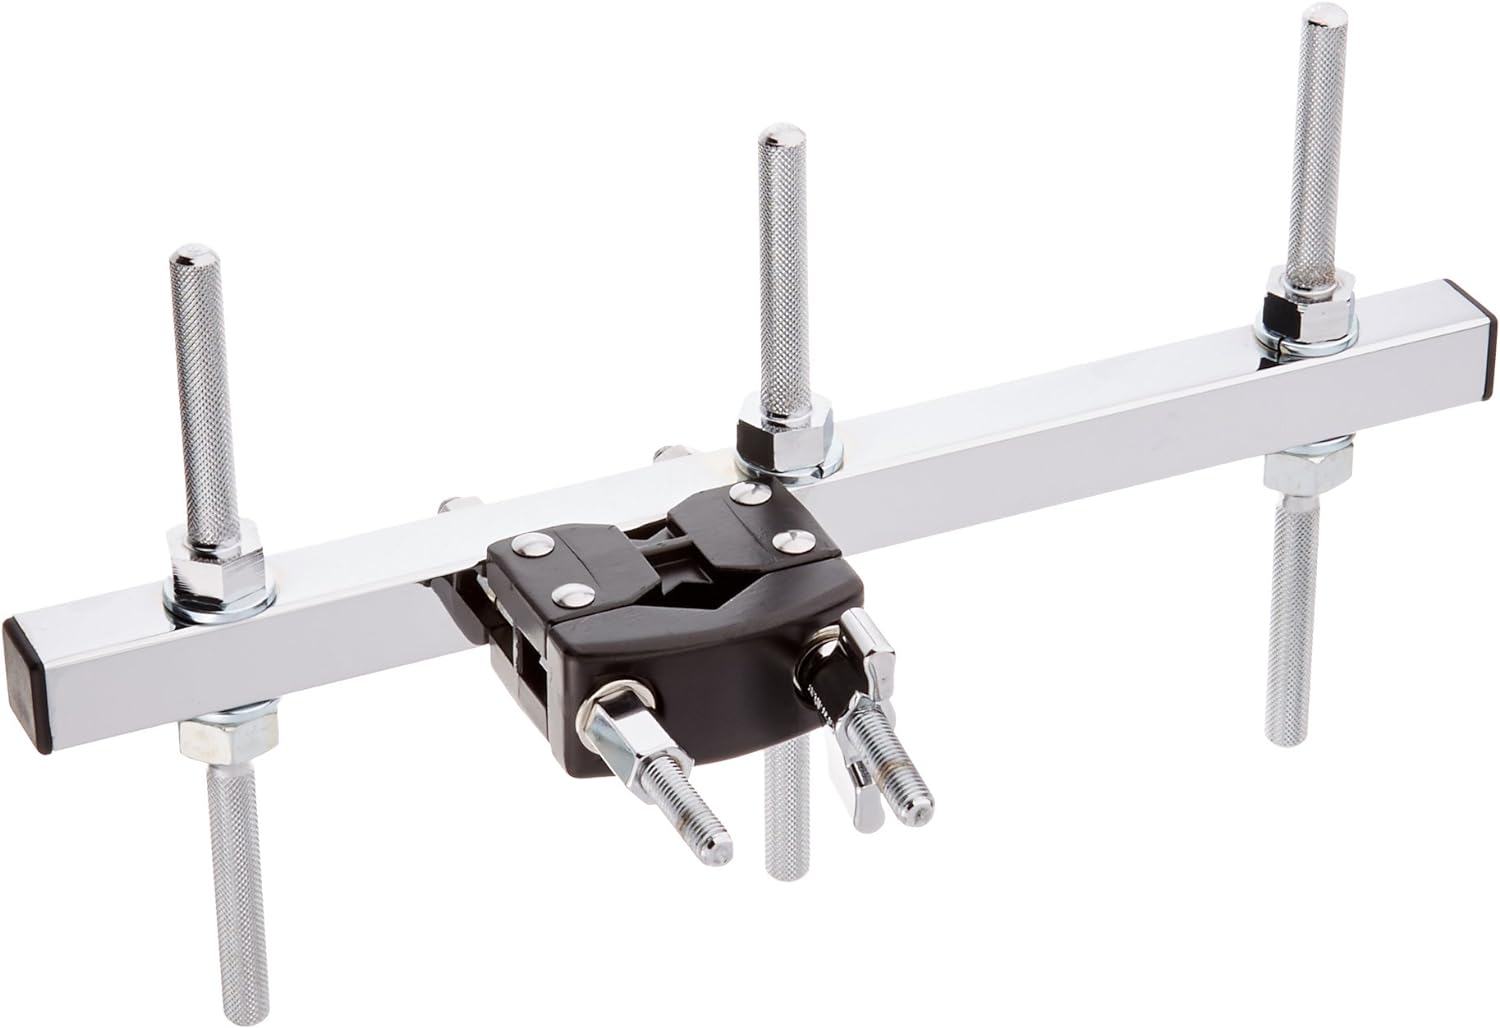 Gibraltar 3-Post Accessory Mount Clamp